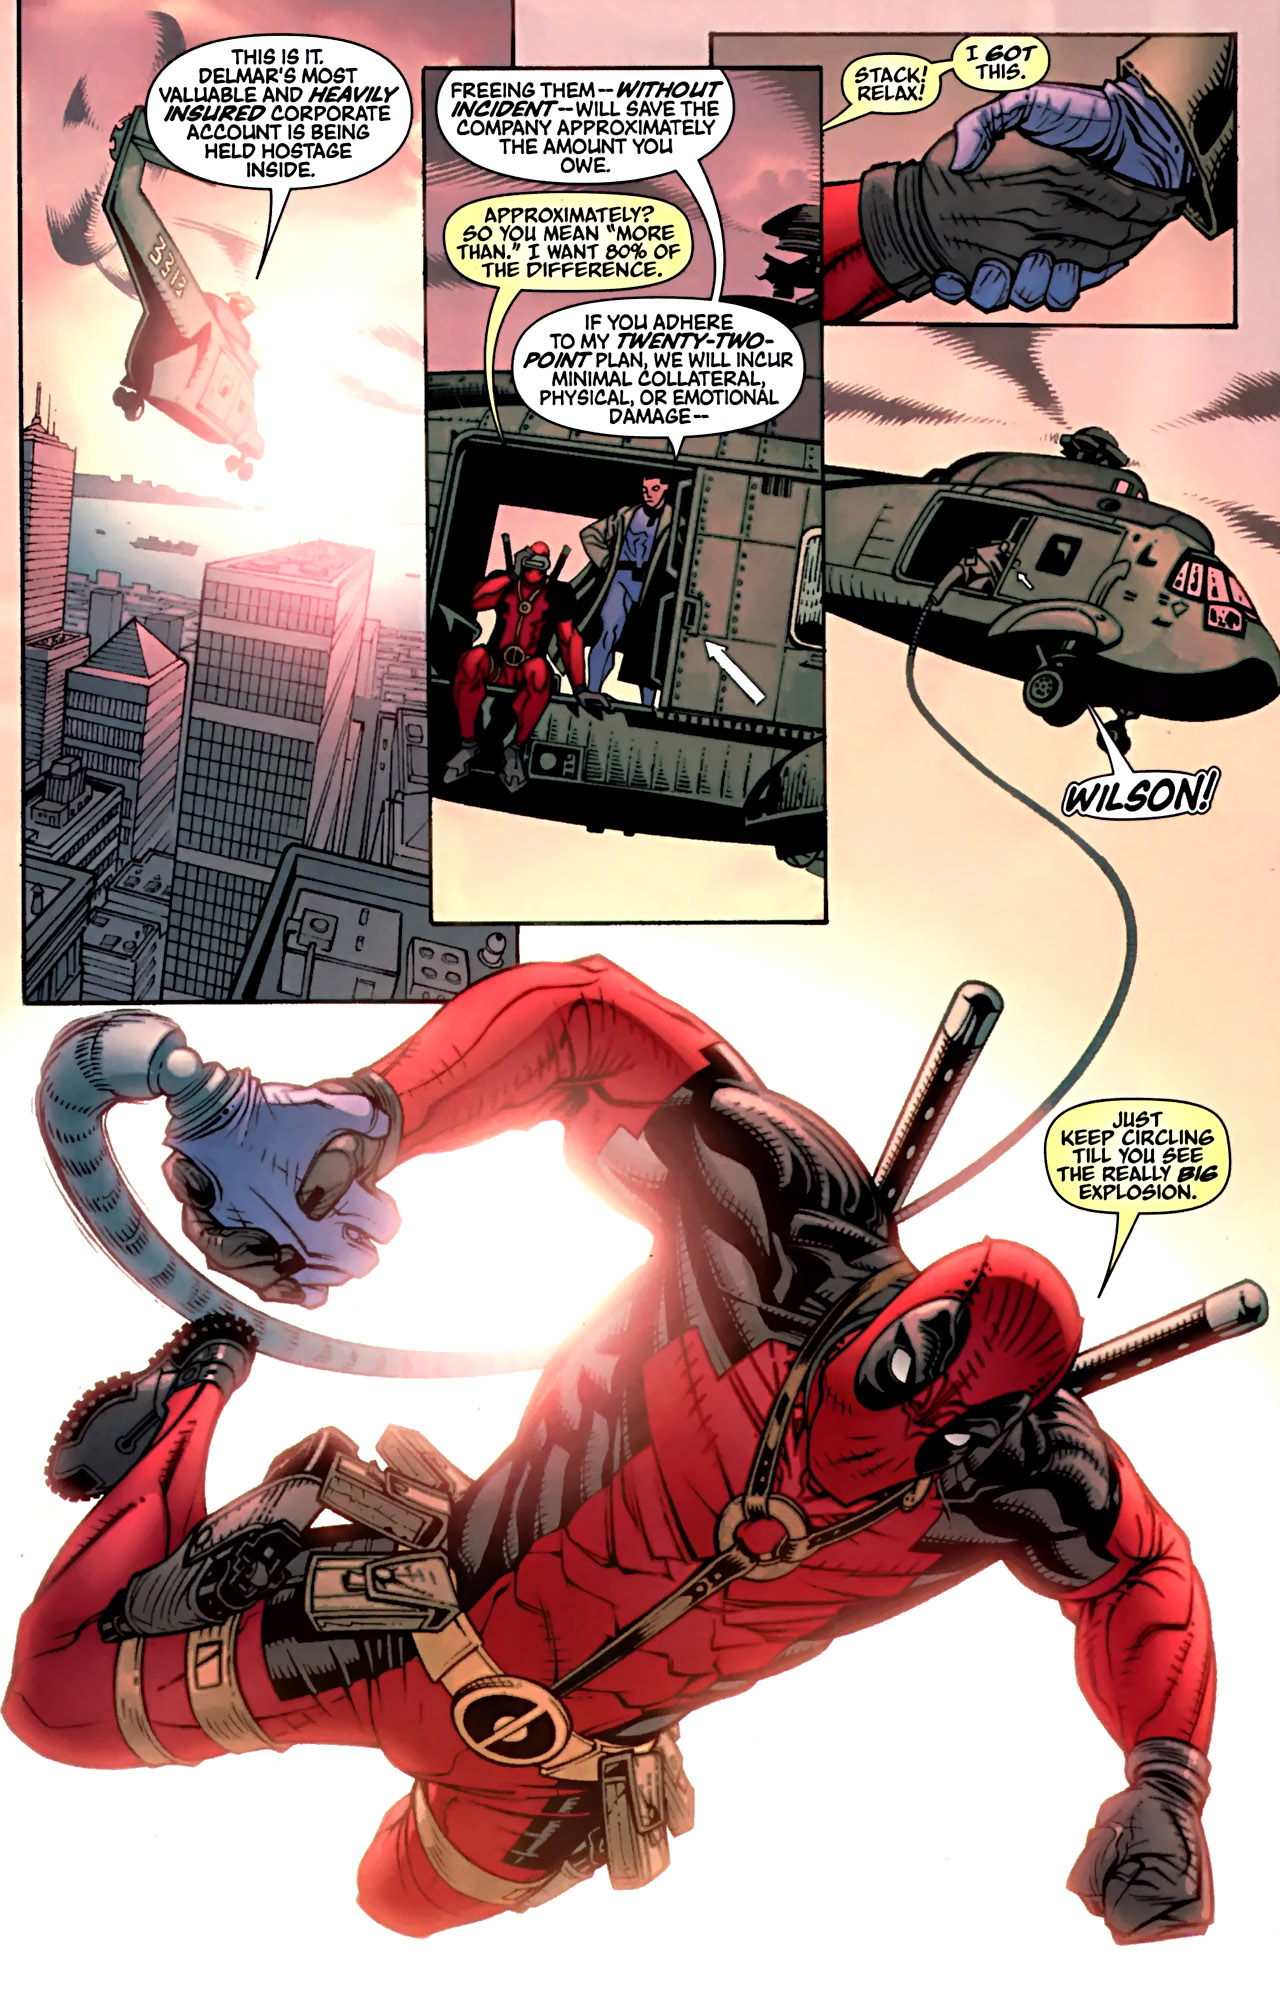 Read online Deadpool Team-Up comic - Issue #890 - 10.